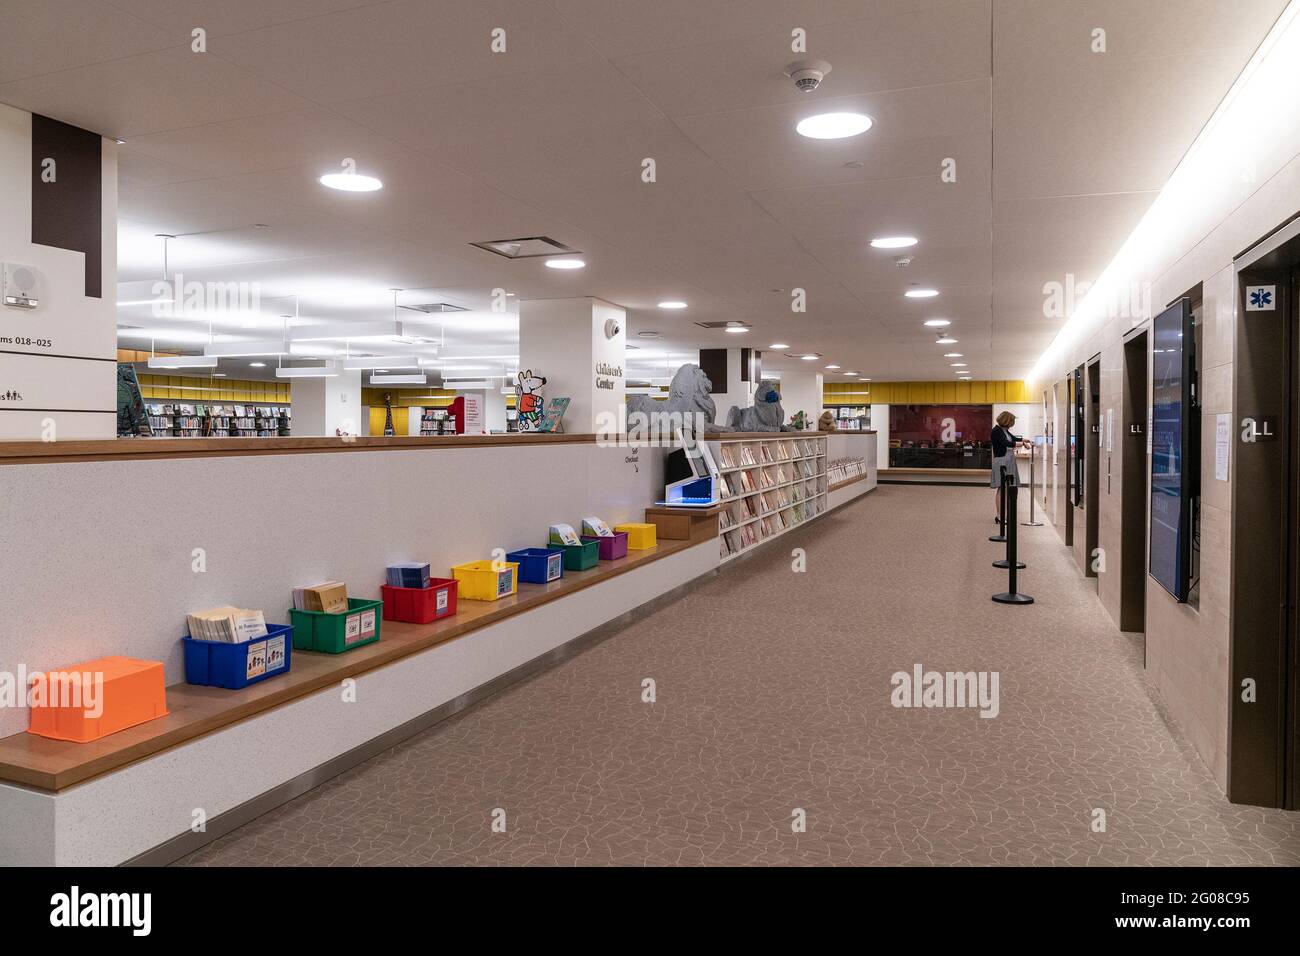 Interior view of children section of newly redesigned Stavros Niarchos Foundation Library with sculptures of iconic NYPL lions made LEGO bricks by artist Nathan Sawaya. After a delay because of COVID-19